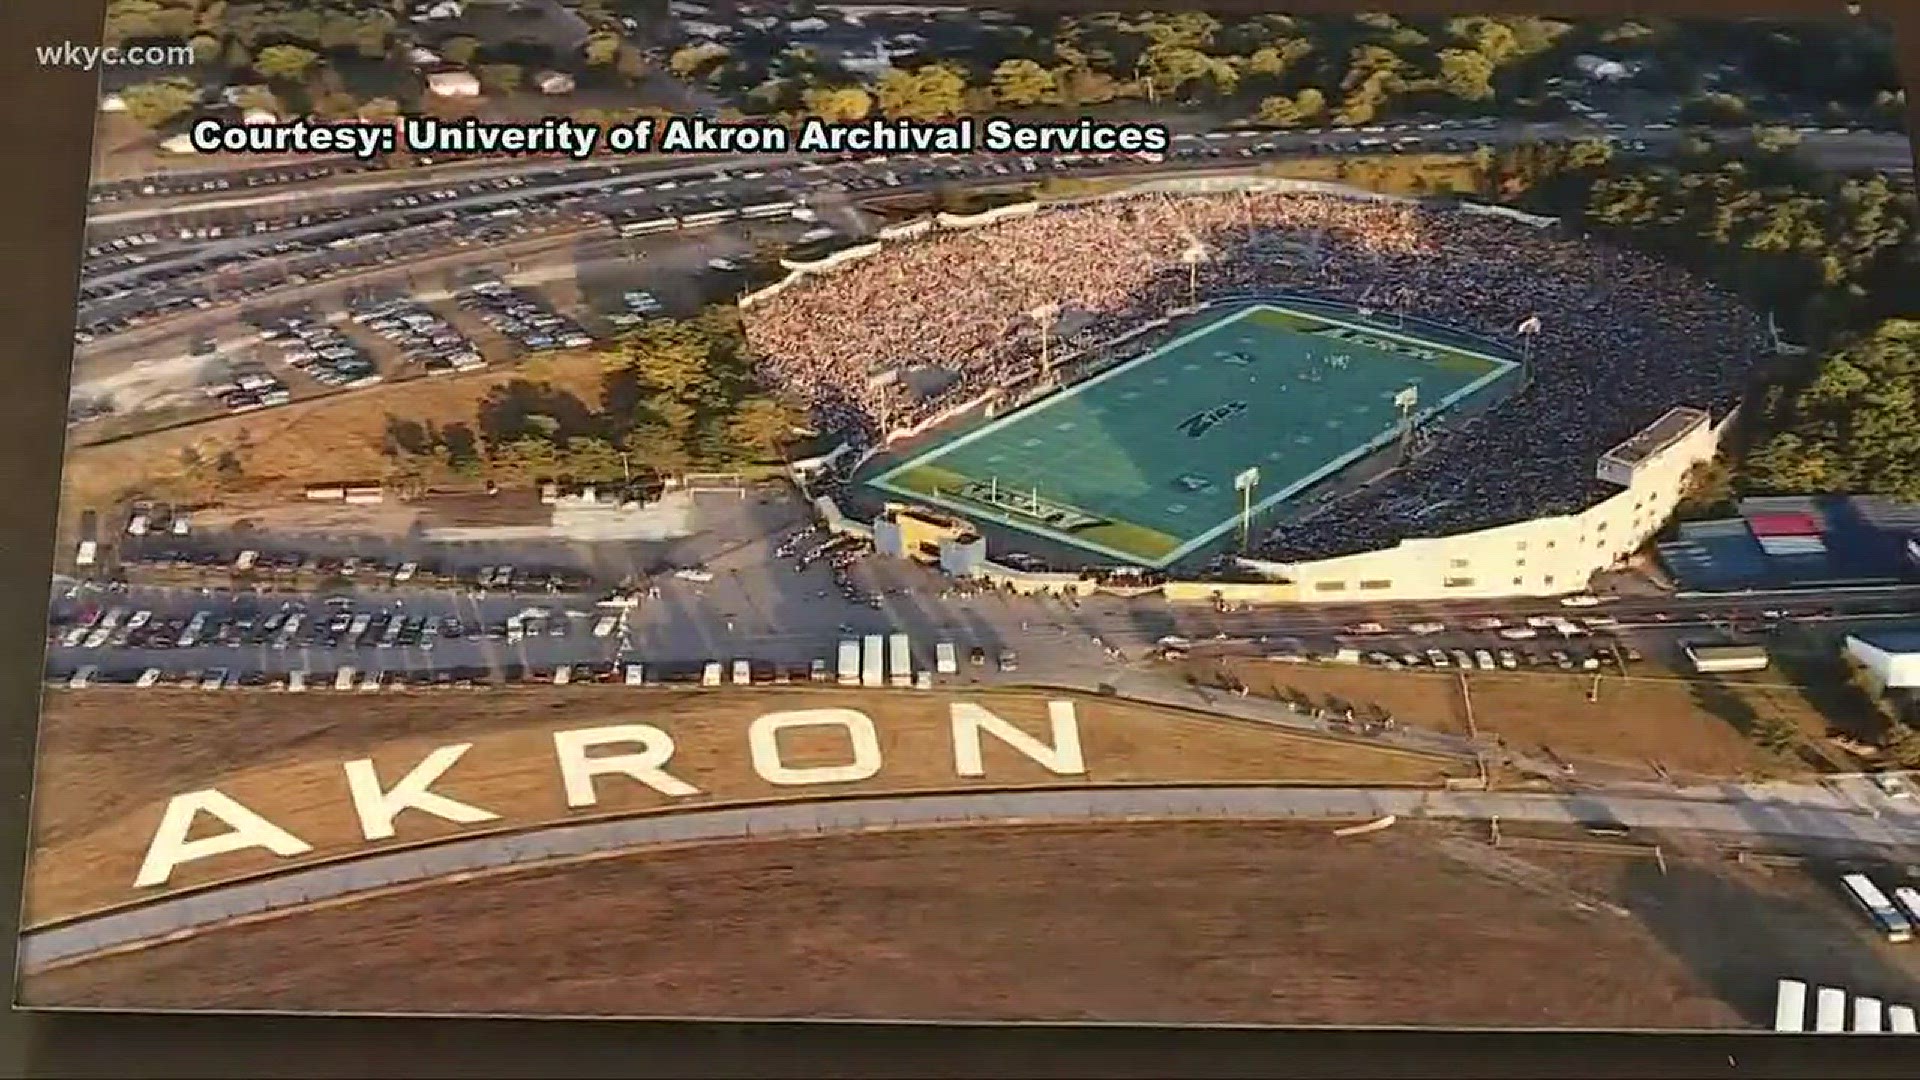 What made Akron's Rubber Bowl so special?